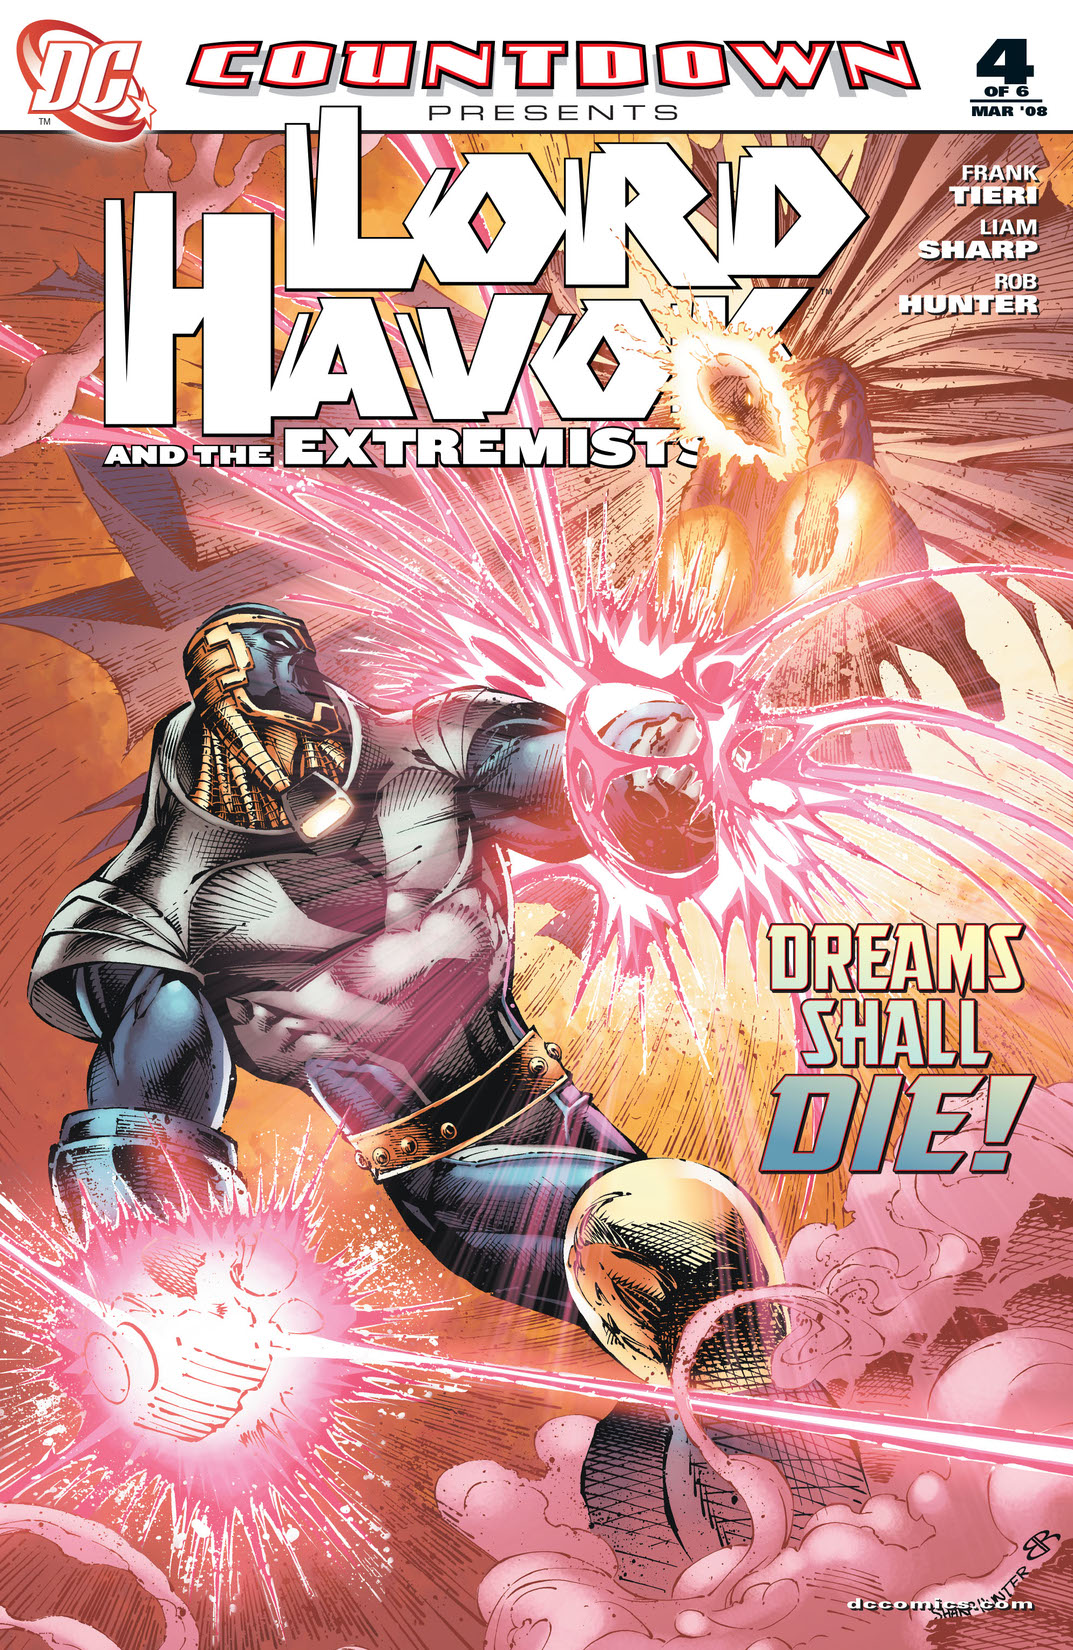 Countdown Presents: Lord Havok & the Extremists #4 preview images